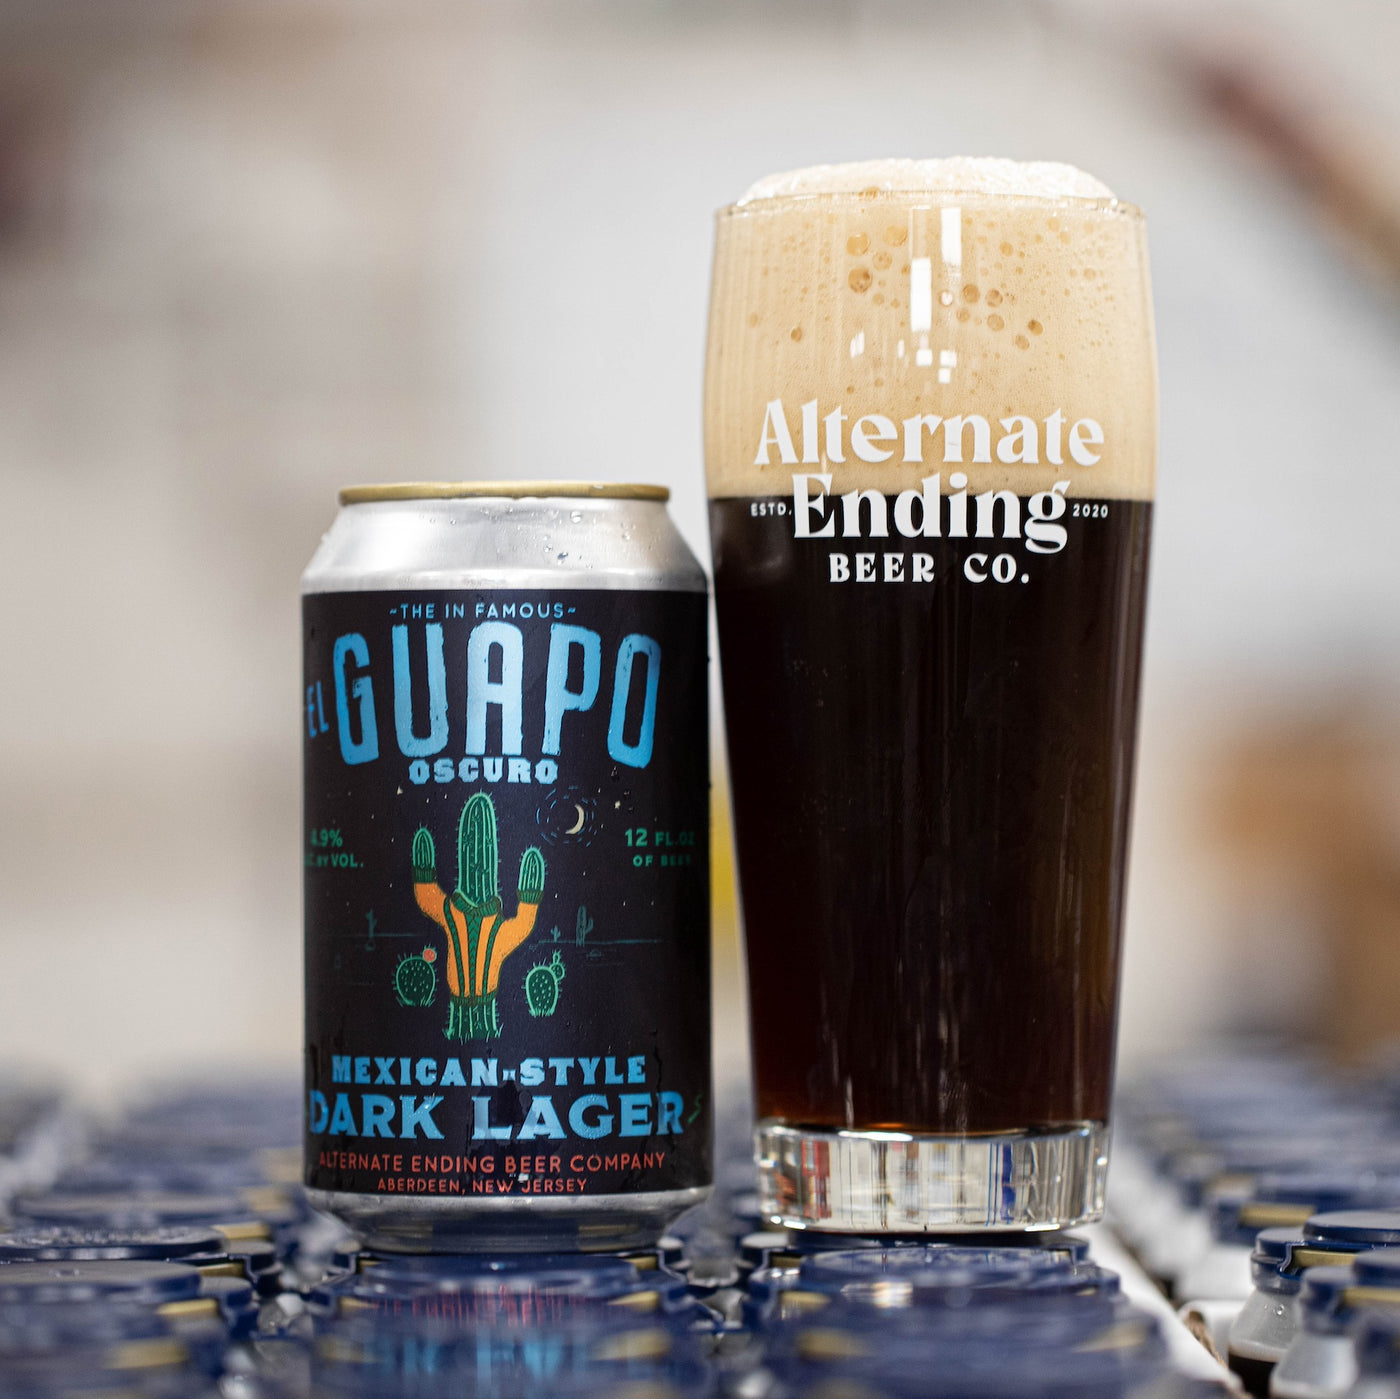 Alternate Ending Beer Co. Mexican-Style Dark Lager 4.9% El Guapo Oscuro